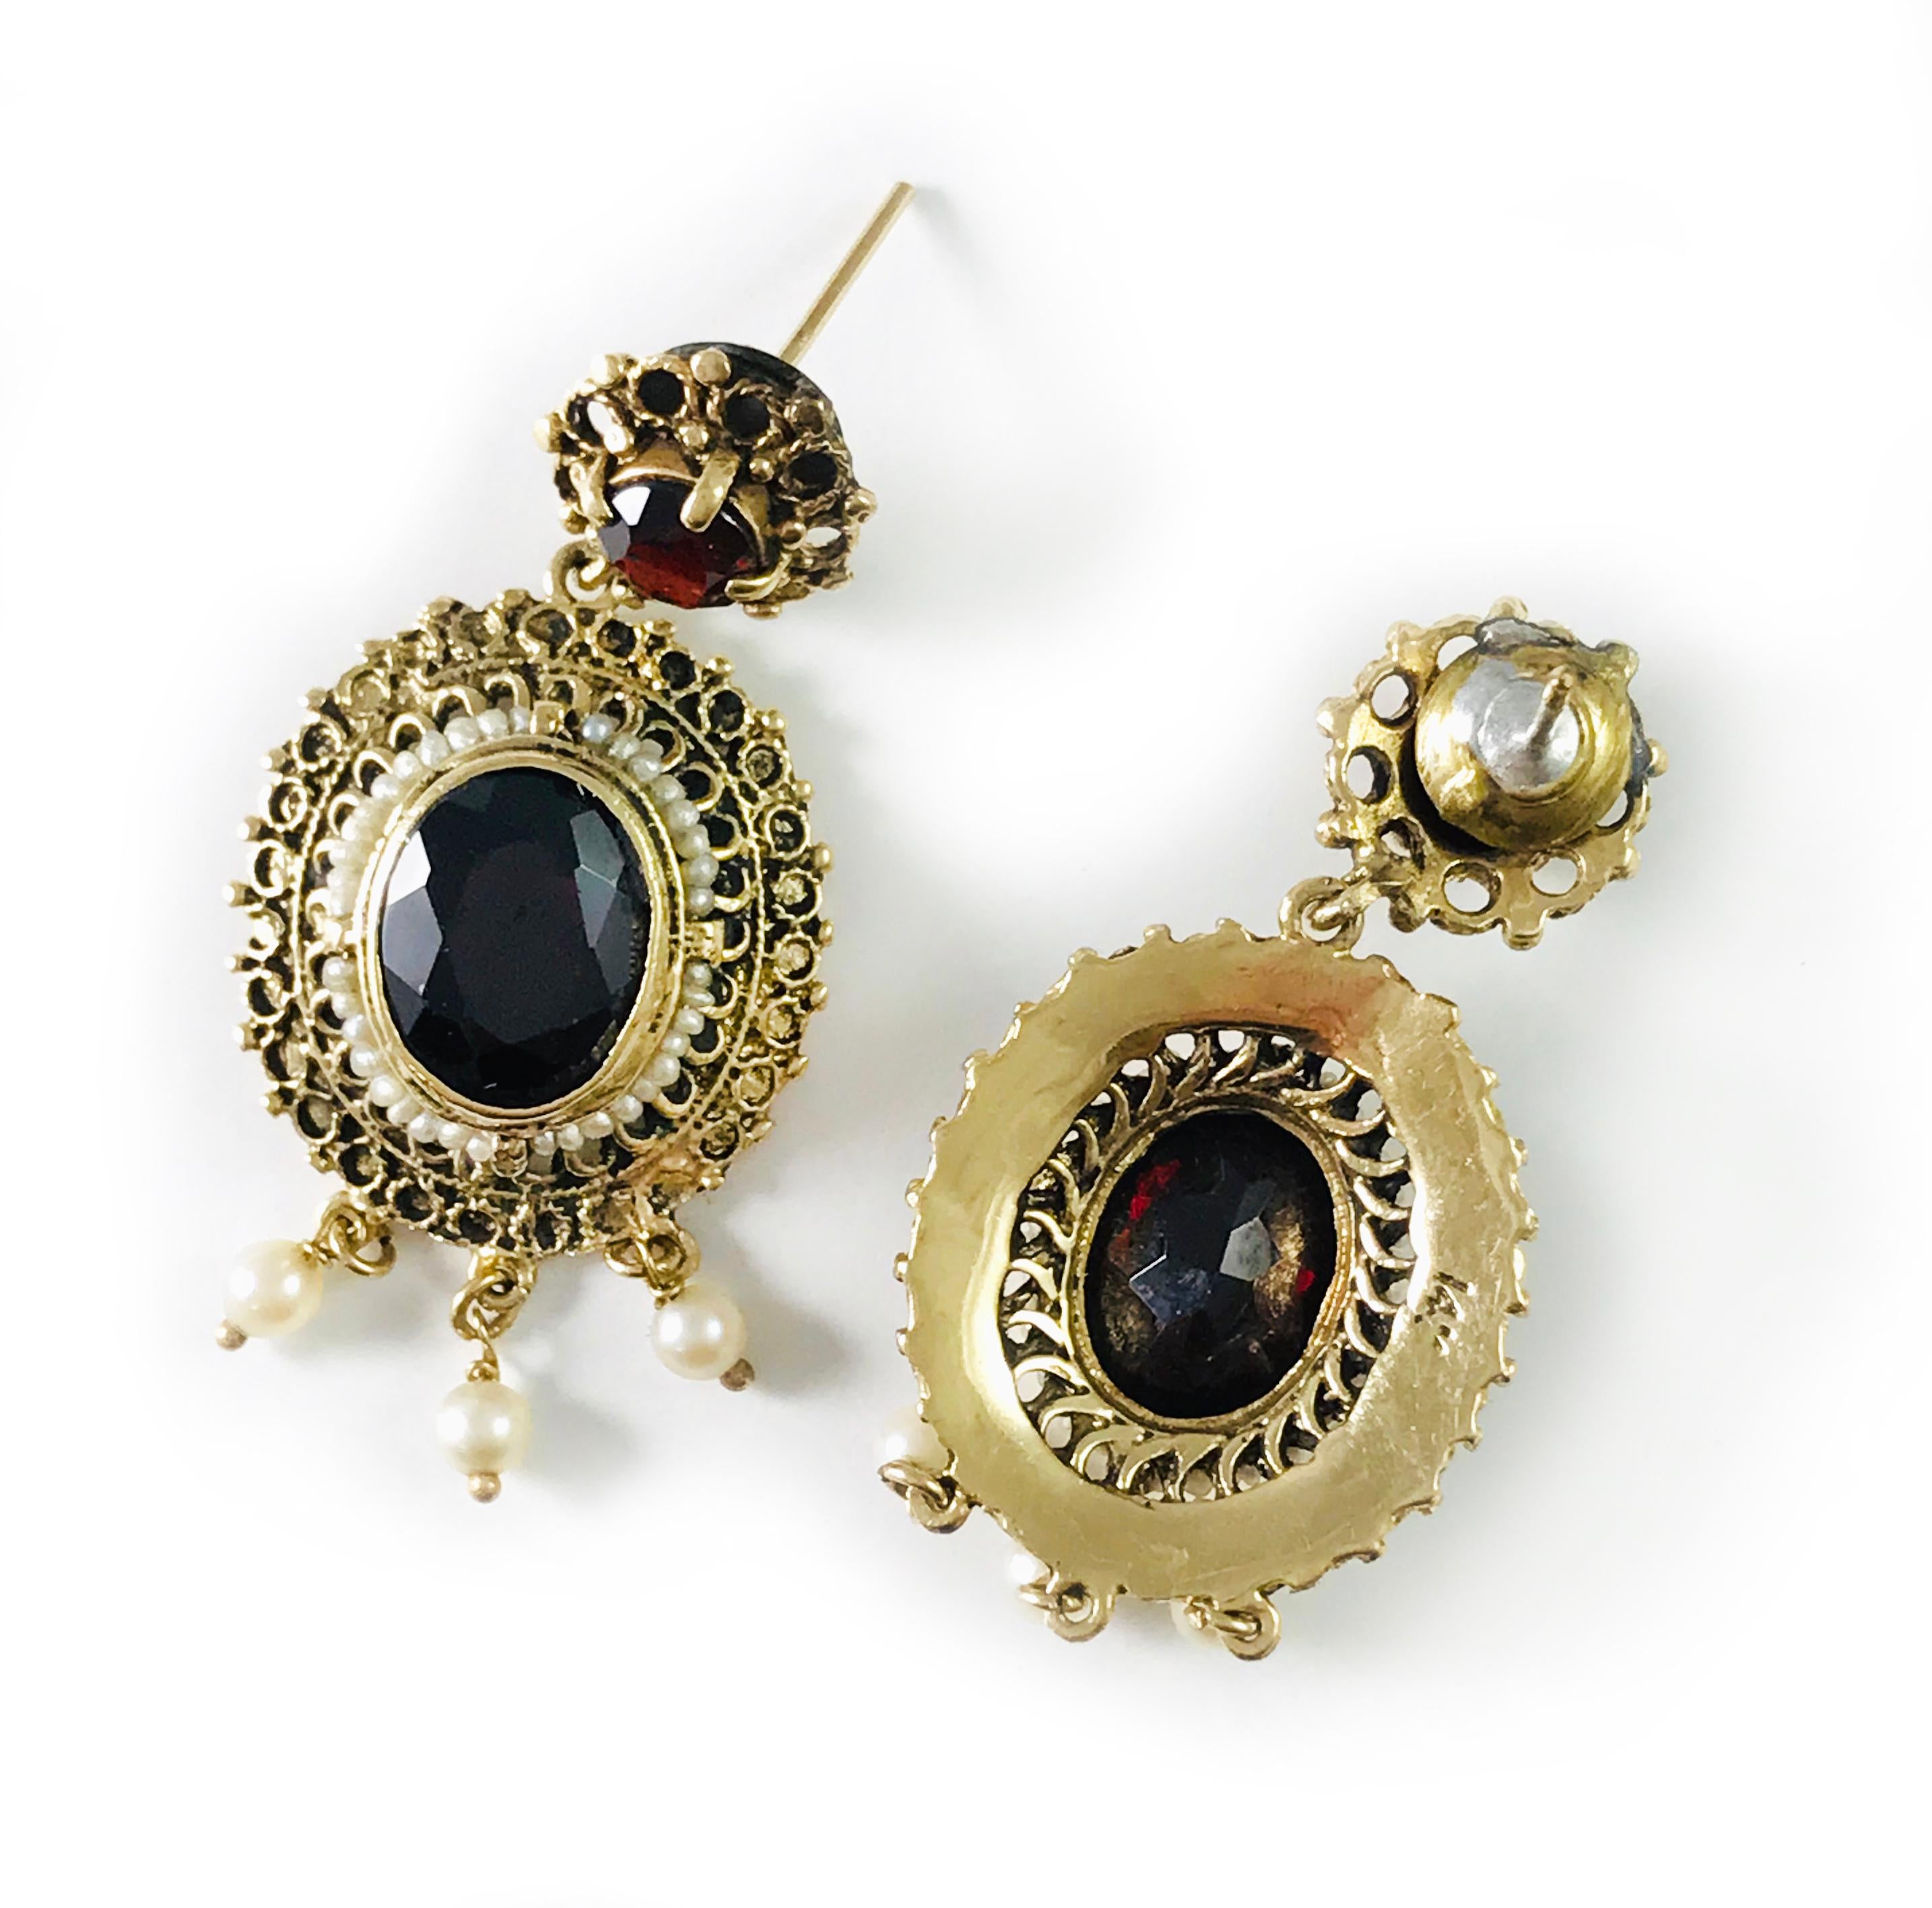 14 Karat Antique Garnet Seed Pearl Earrings. An ornate design with an oval and round garnet and three petite pearls that dangle on the bottom of each earring. A single row of seed pearls surround the oval bezel-set Garnet. The romantic style make